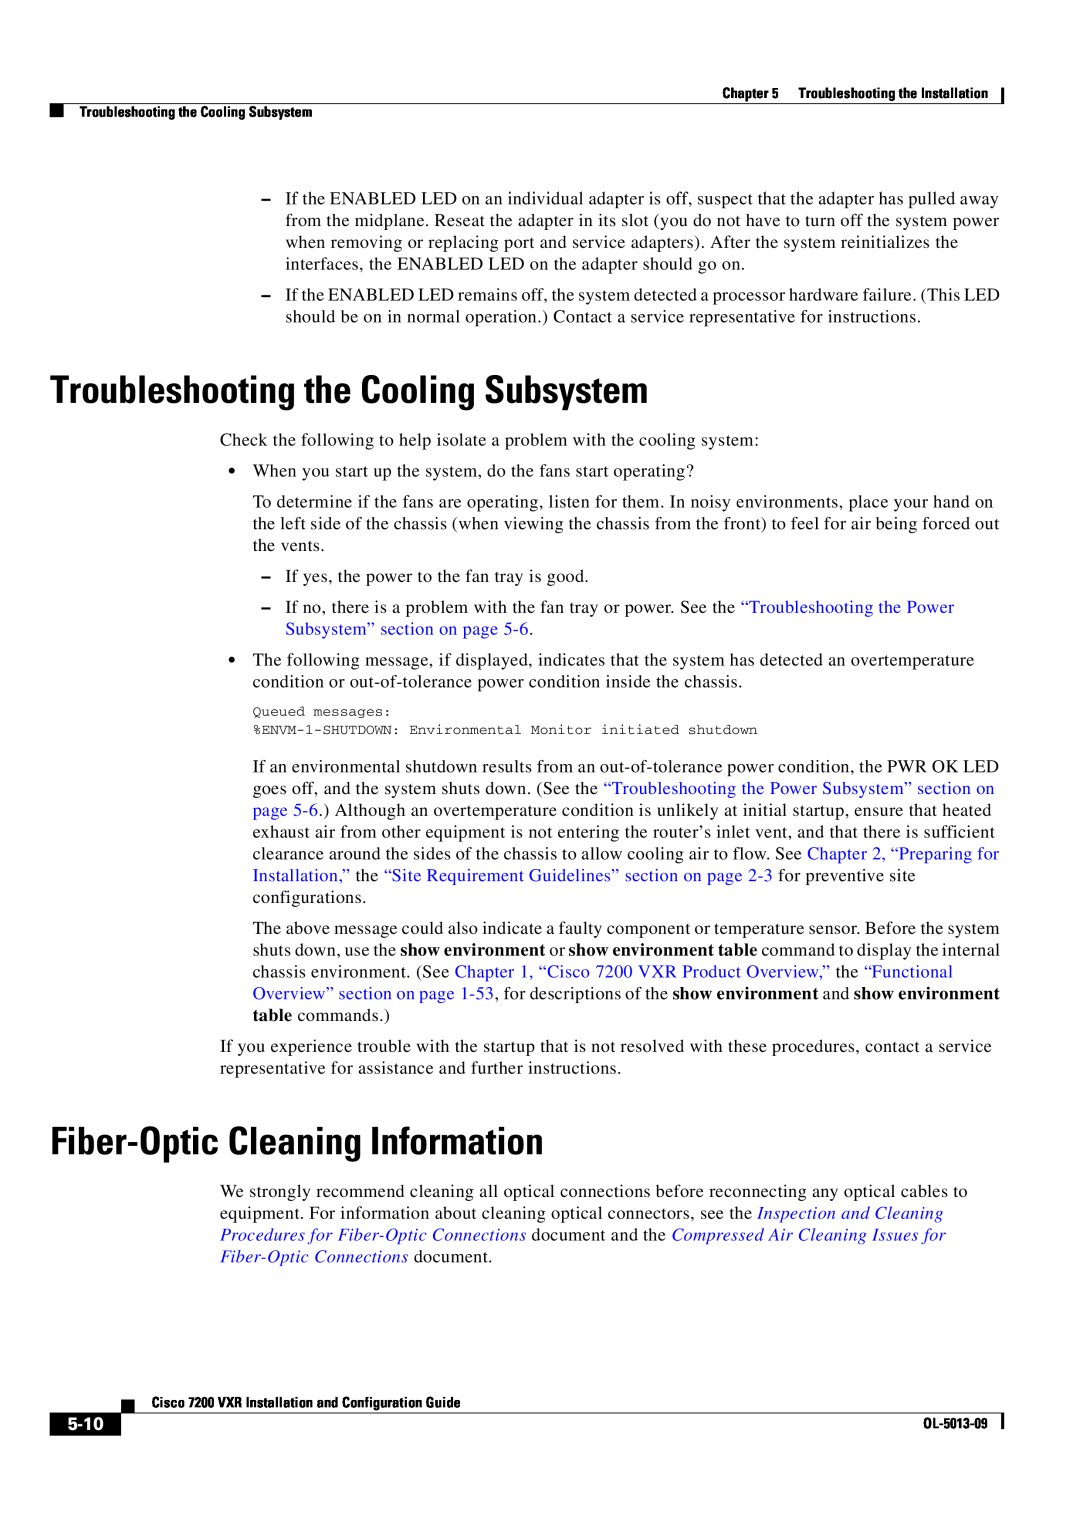 Cisco Systems 7200 VXR manual Troubleshooting the Cooling Subsystem, Fiber-Optic Cleaning Information, 5-10 